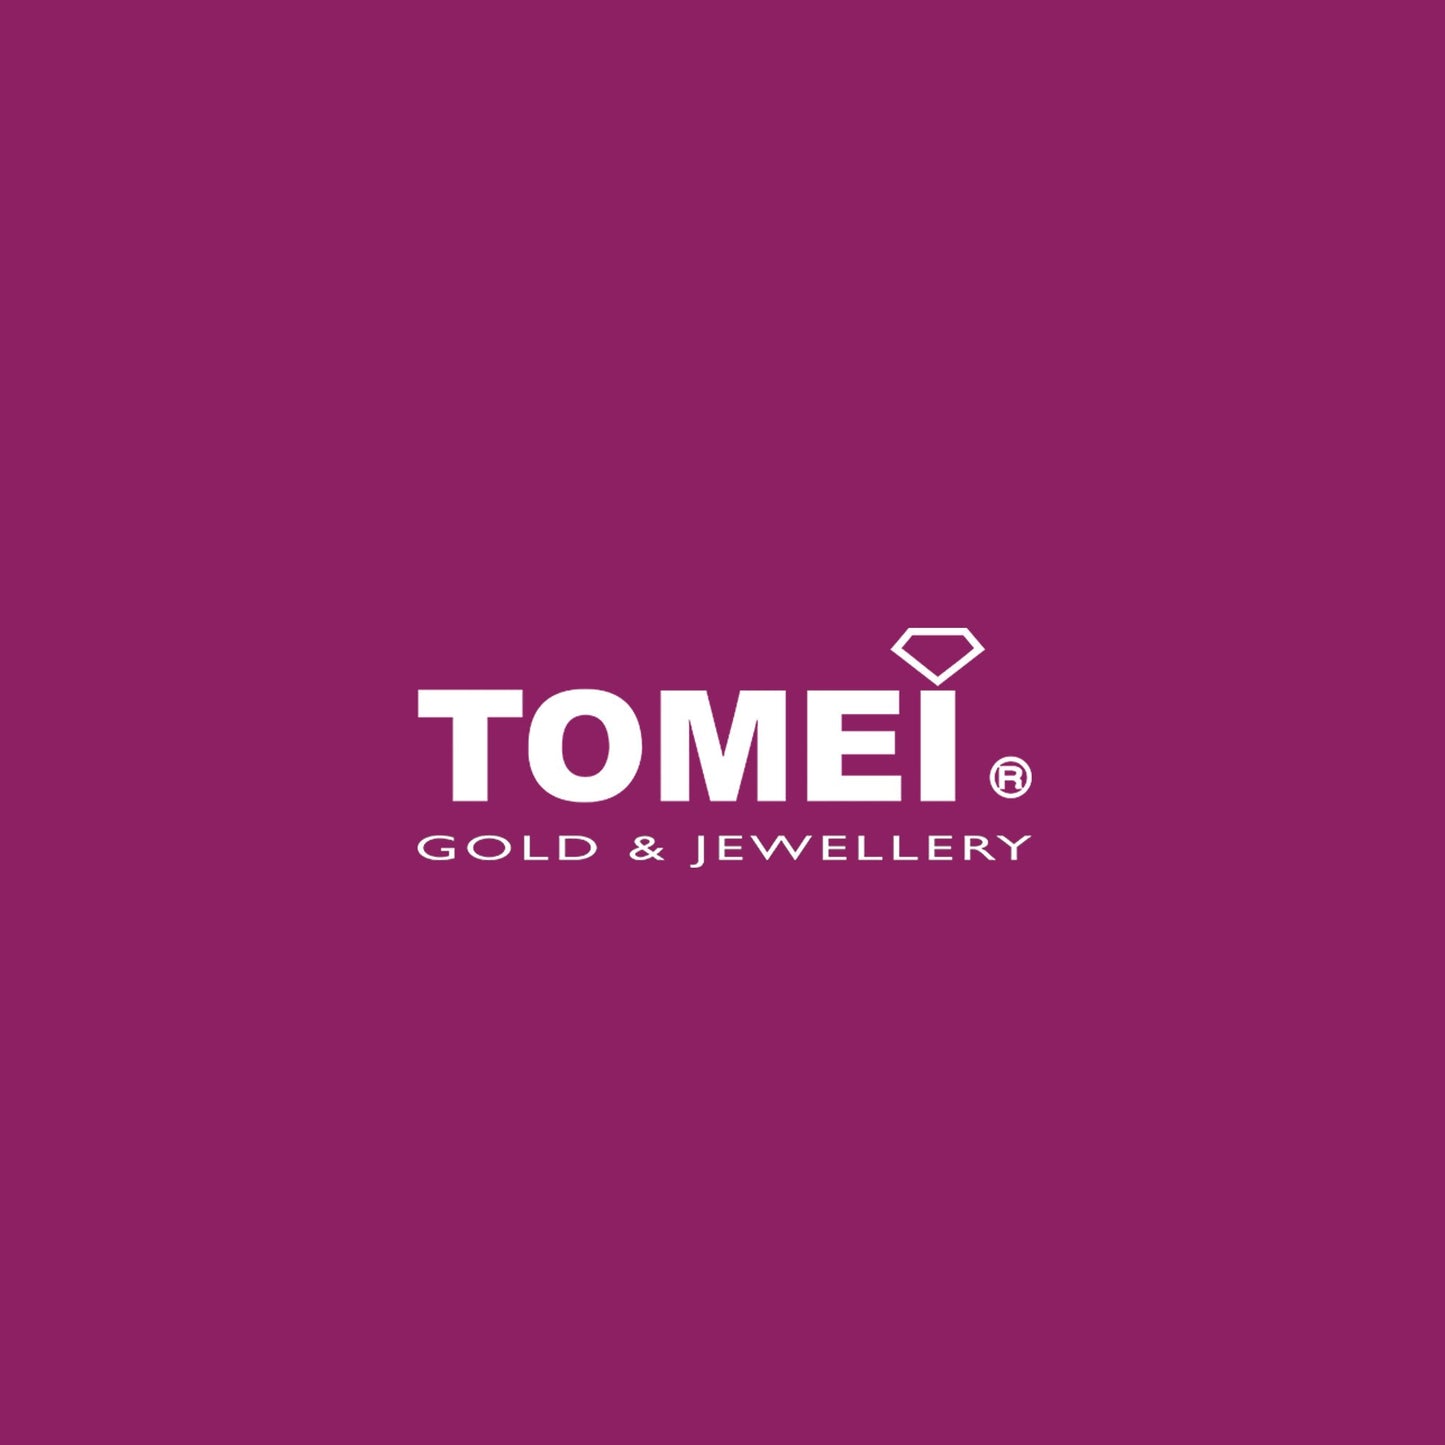 TOMEI Tiger And Fu Pendant, Yellow Gold 916